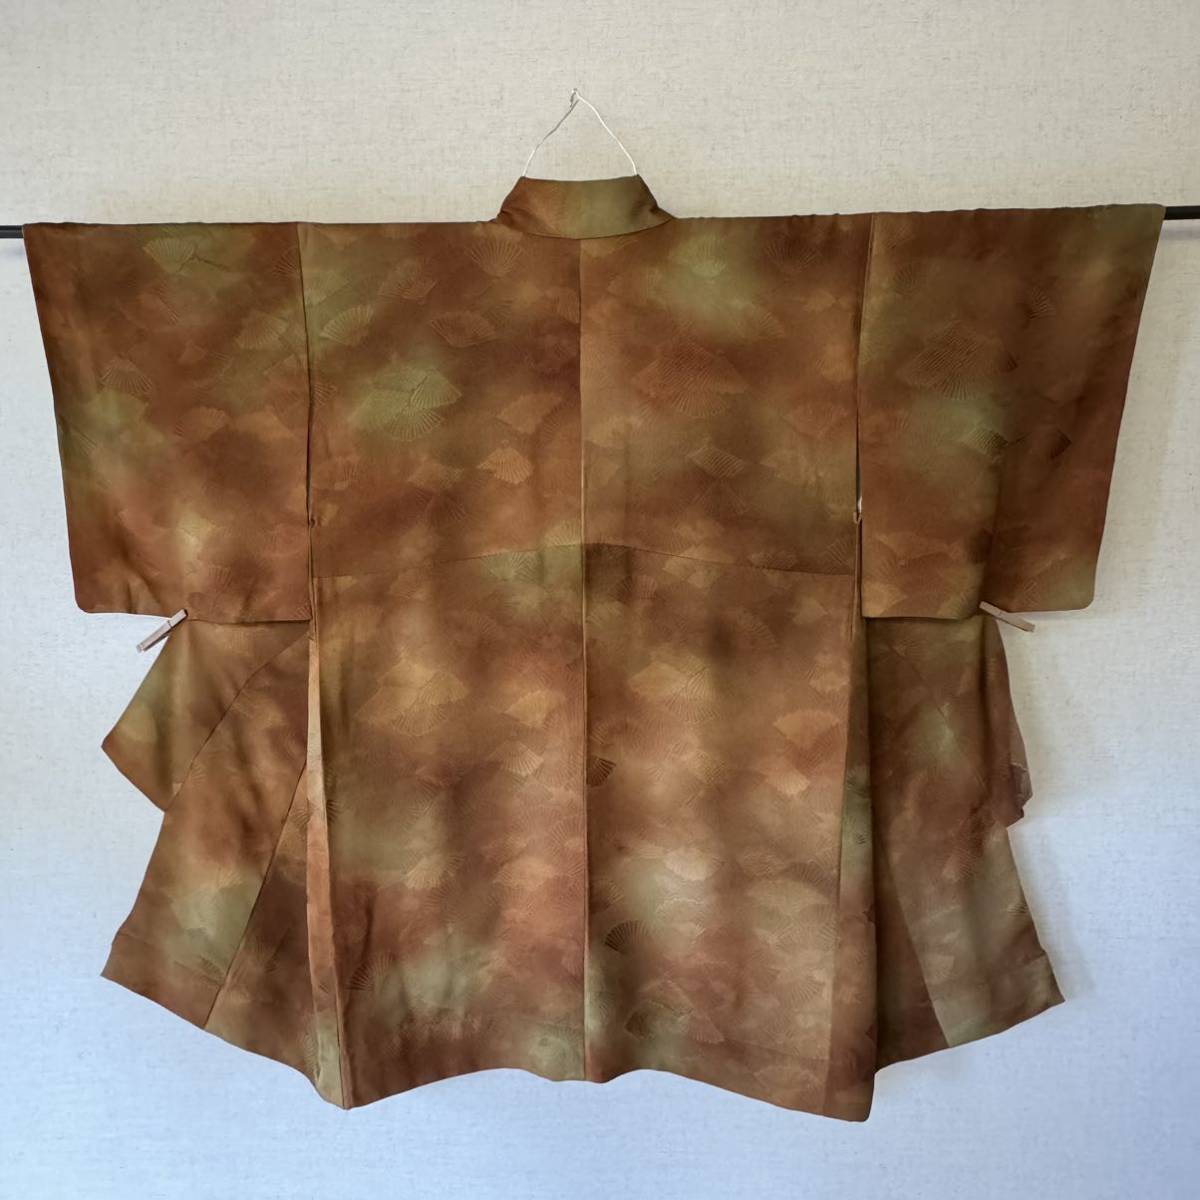  archery for women used kimono silk ... attaching hakama for .66 centimeter 20231029-02 postage commodity explanation . equipped.